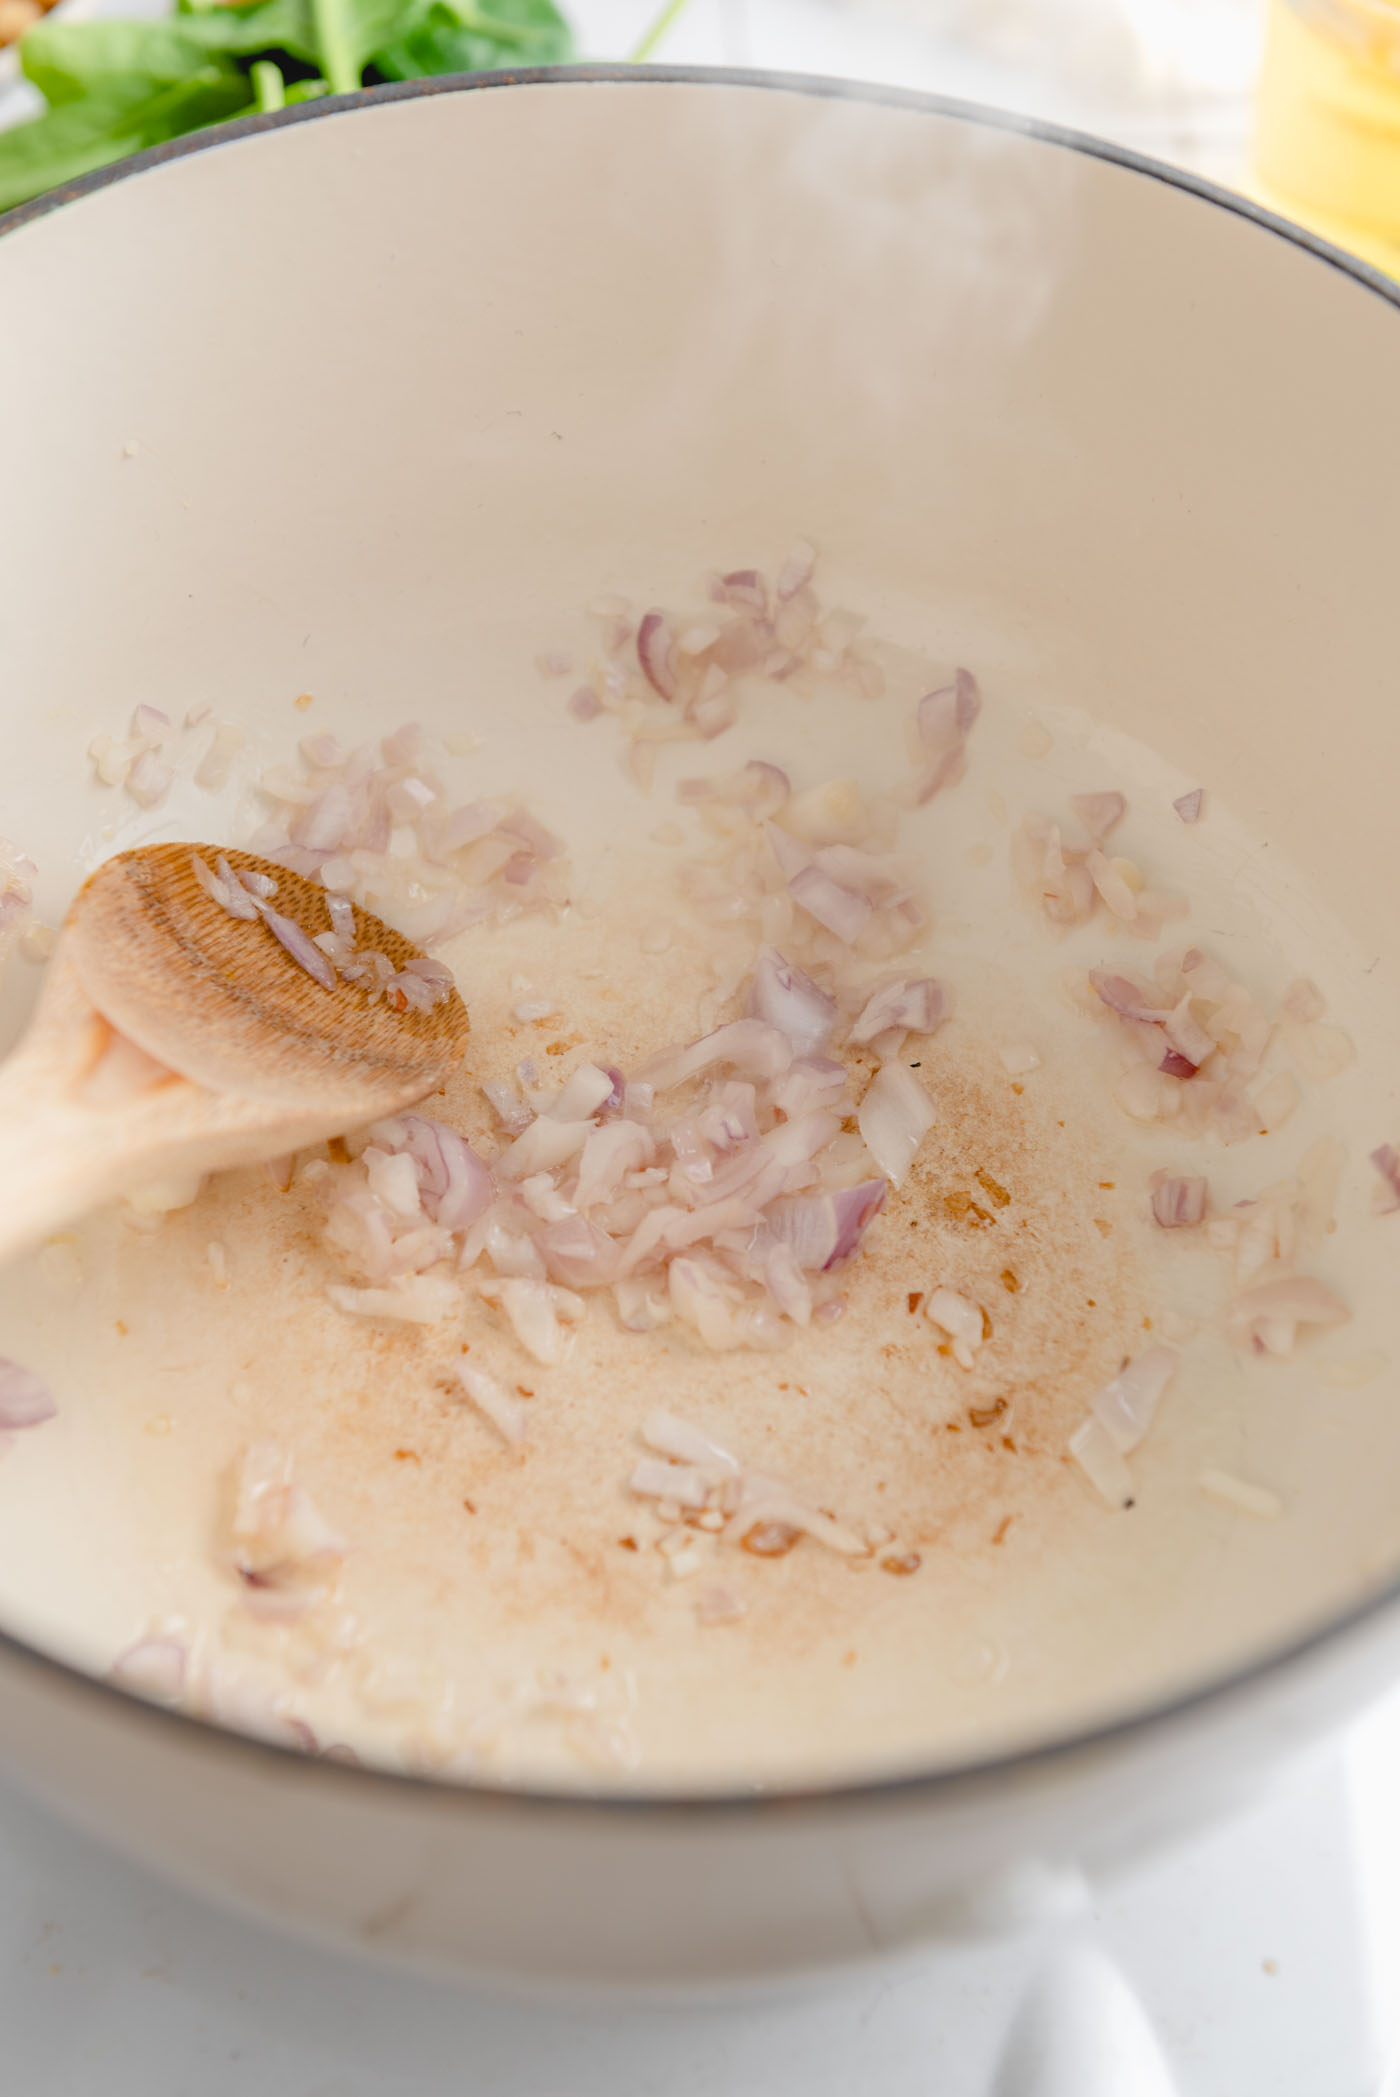 Minced shallot cooking in a large soup pot with a wooden spoon.